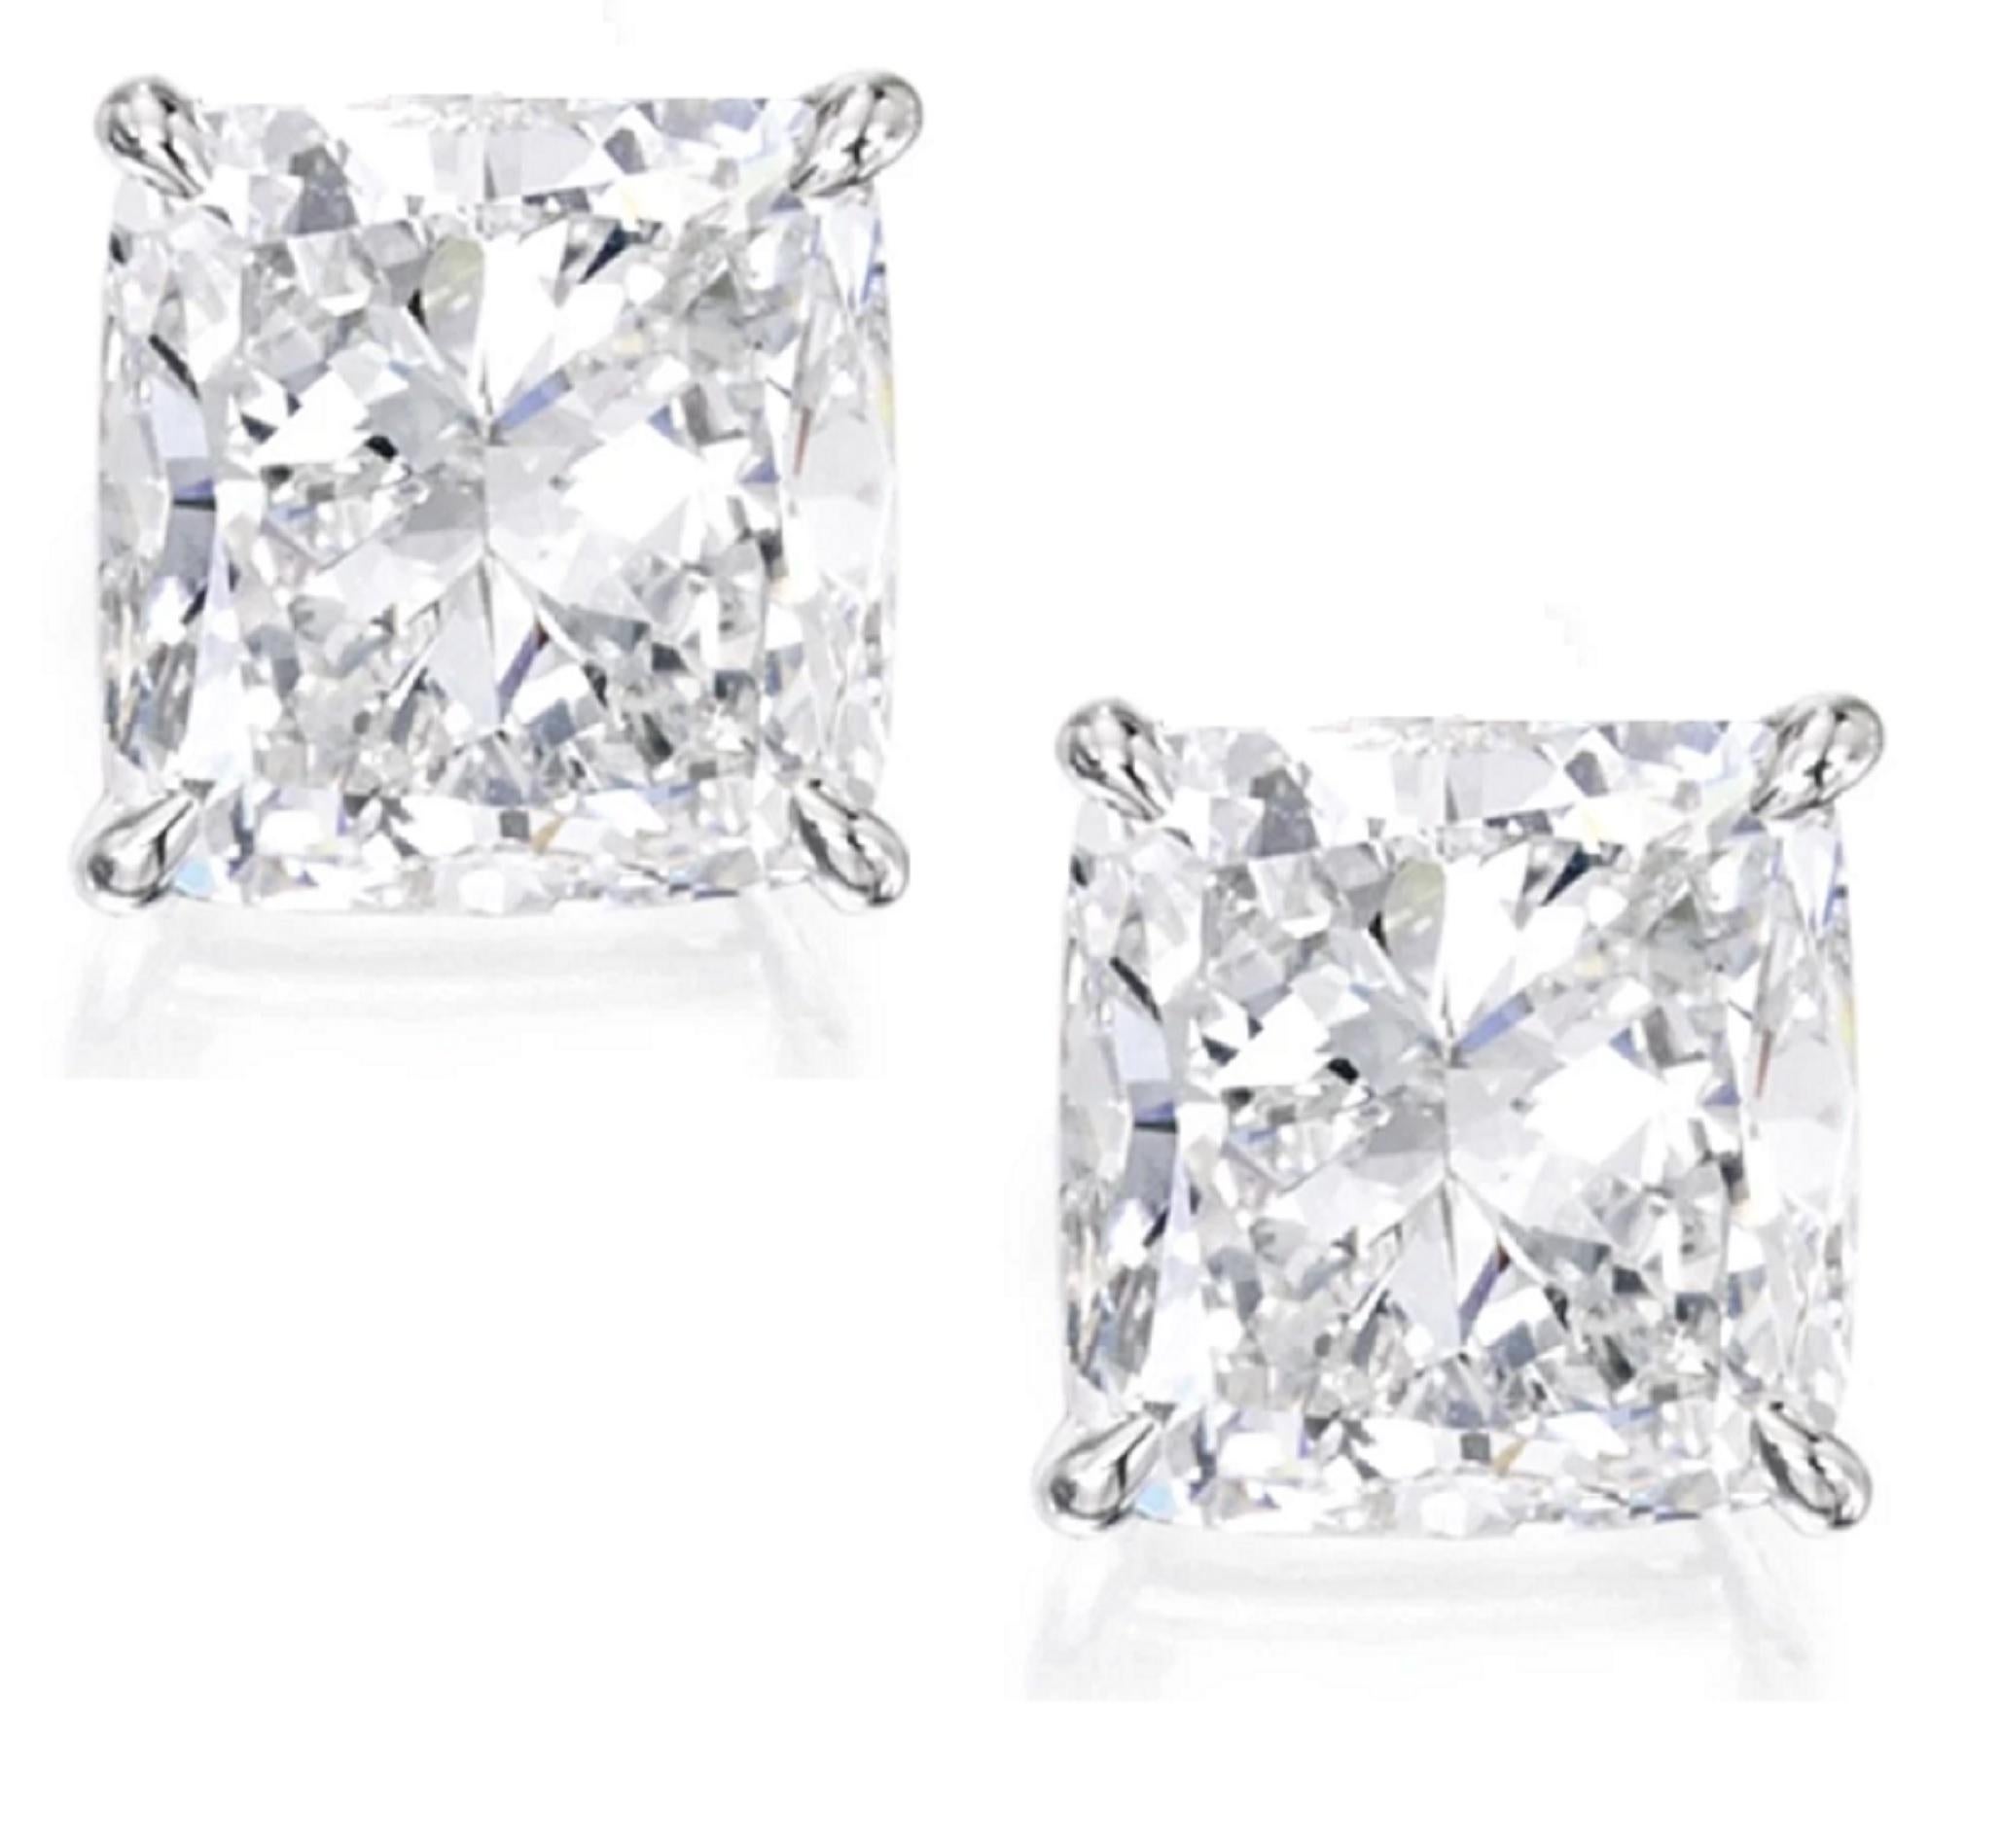 GIA Certified 4 Carat Cushion Cut Diamond Studs

There is very minimal black in these diamonds. The inclusions all blend perfectly into the sparkle and are difficult to pick out with the naked eye even under very close scrutiny! The inclusions do